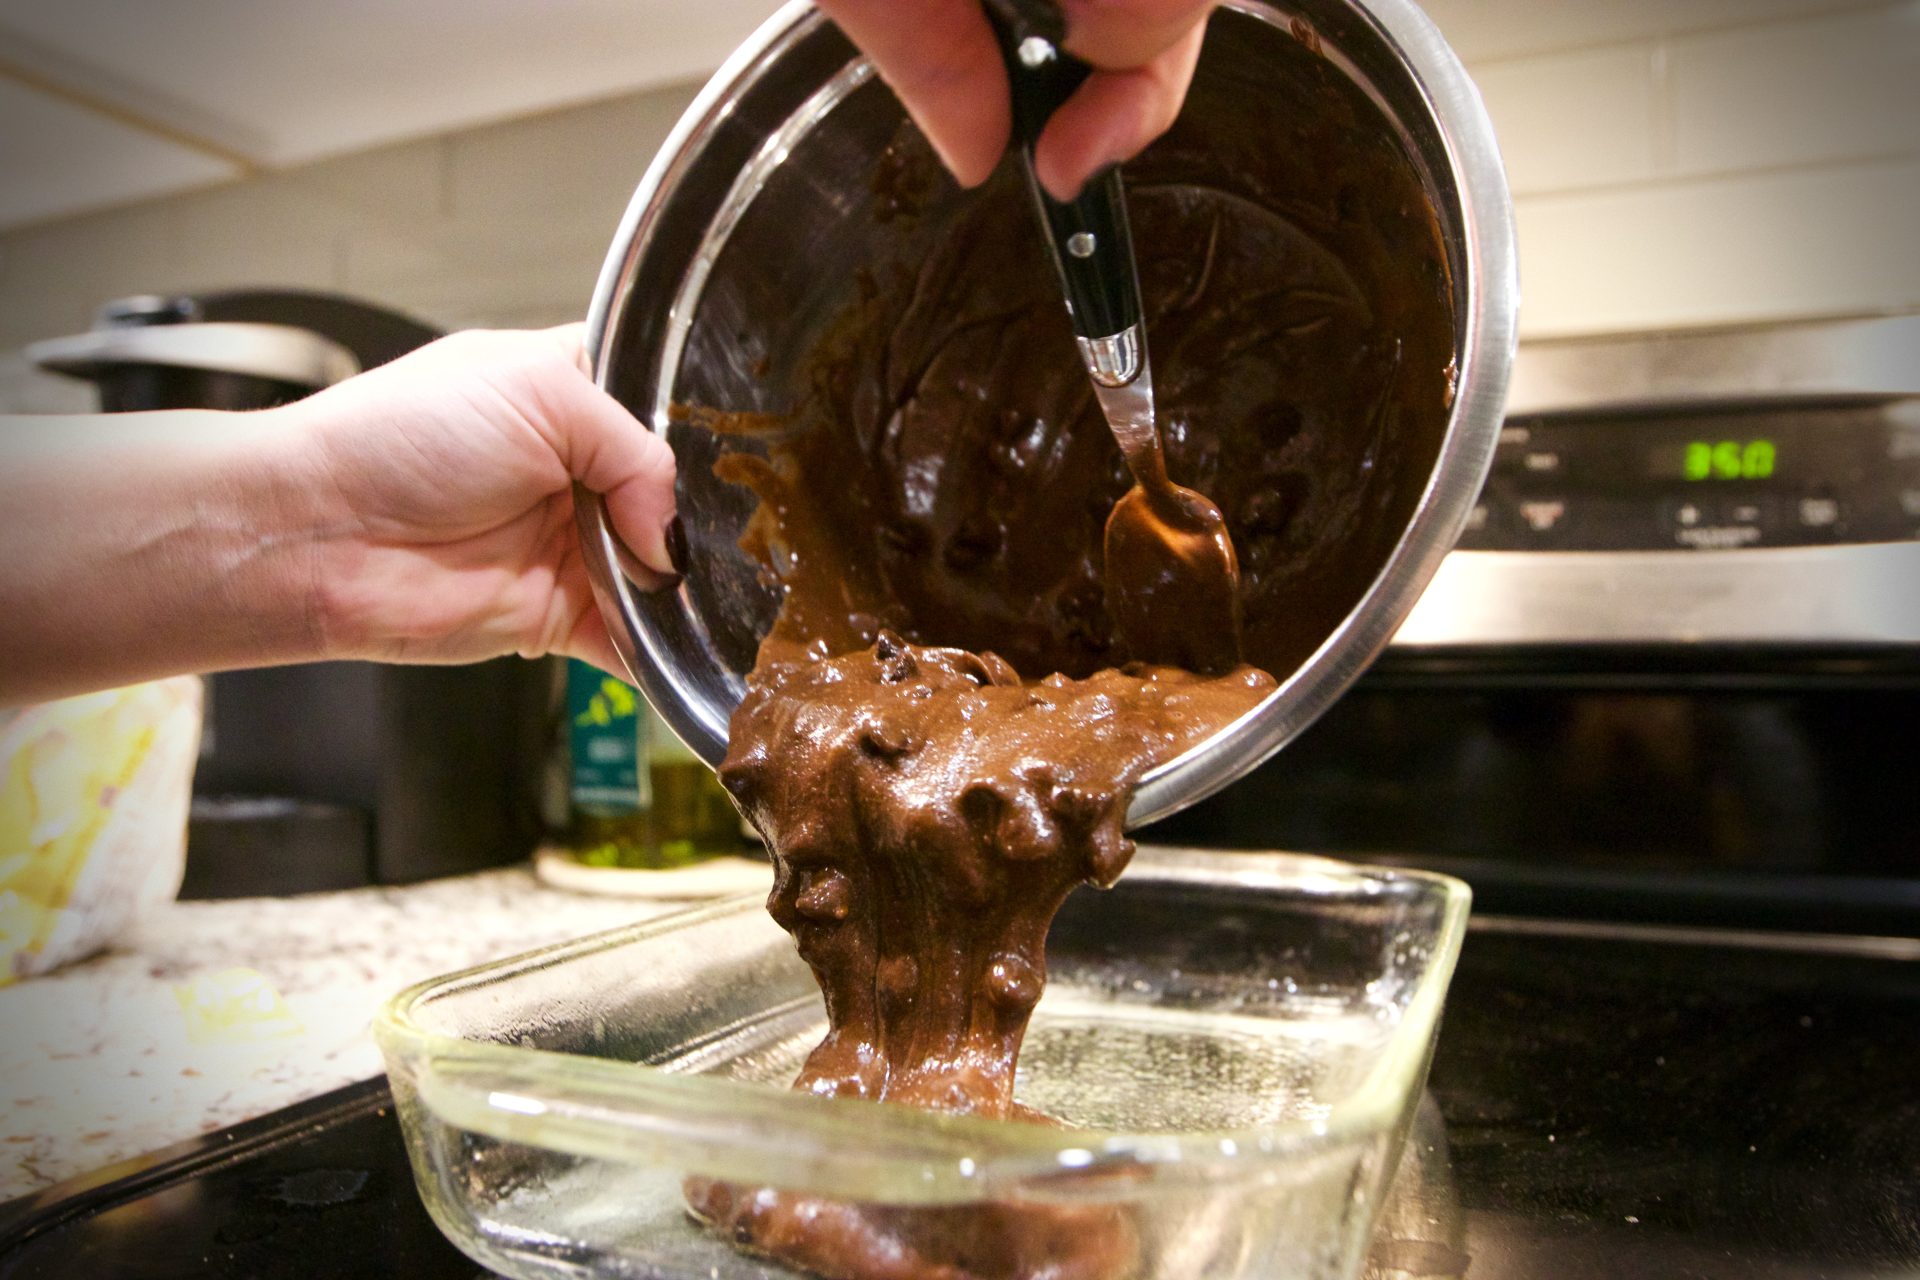 Brownie batter being poured into glass pan.